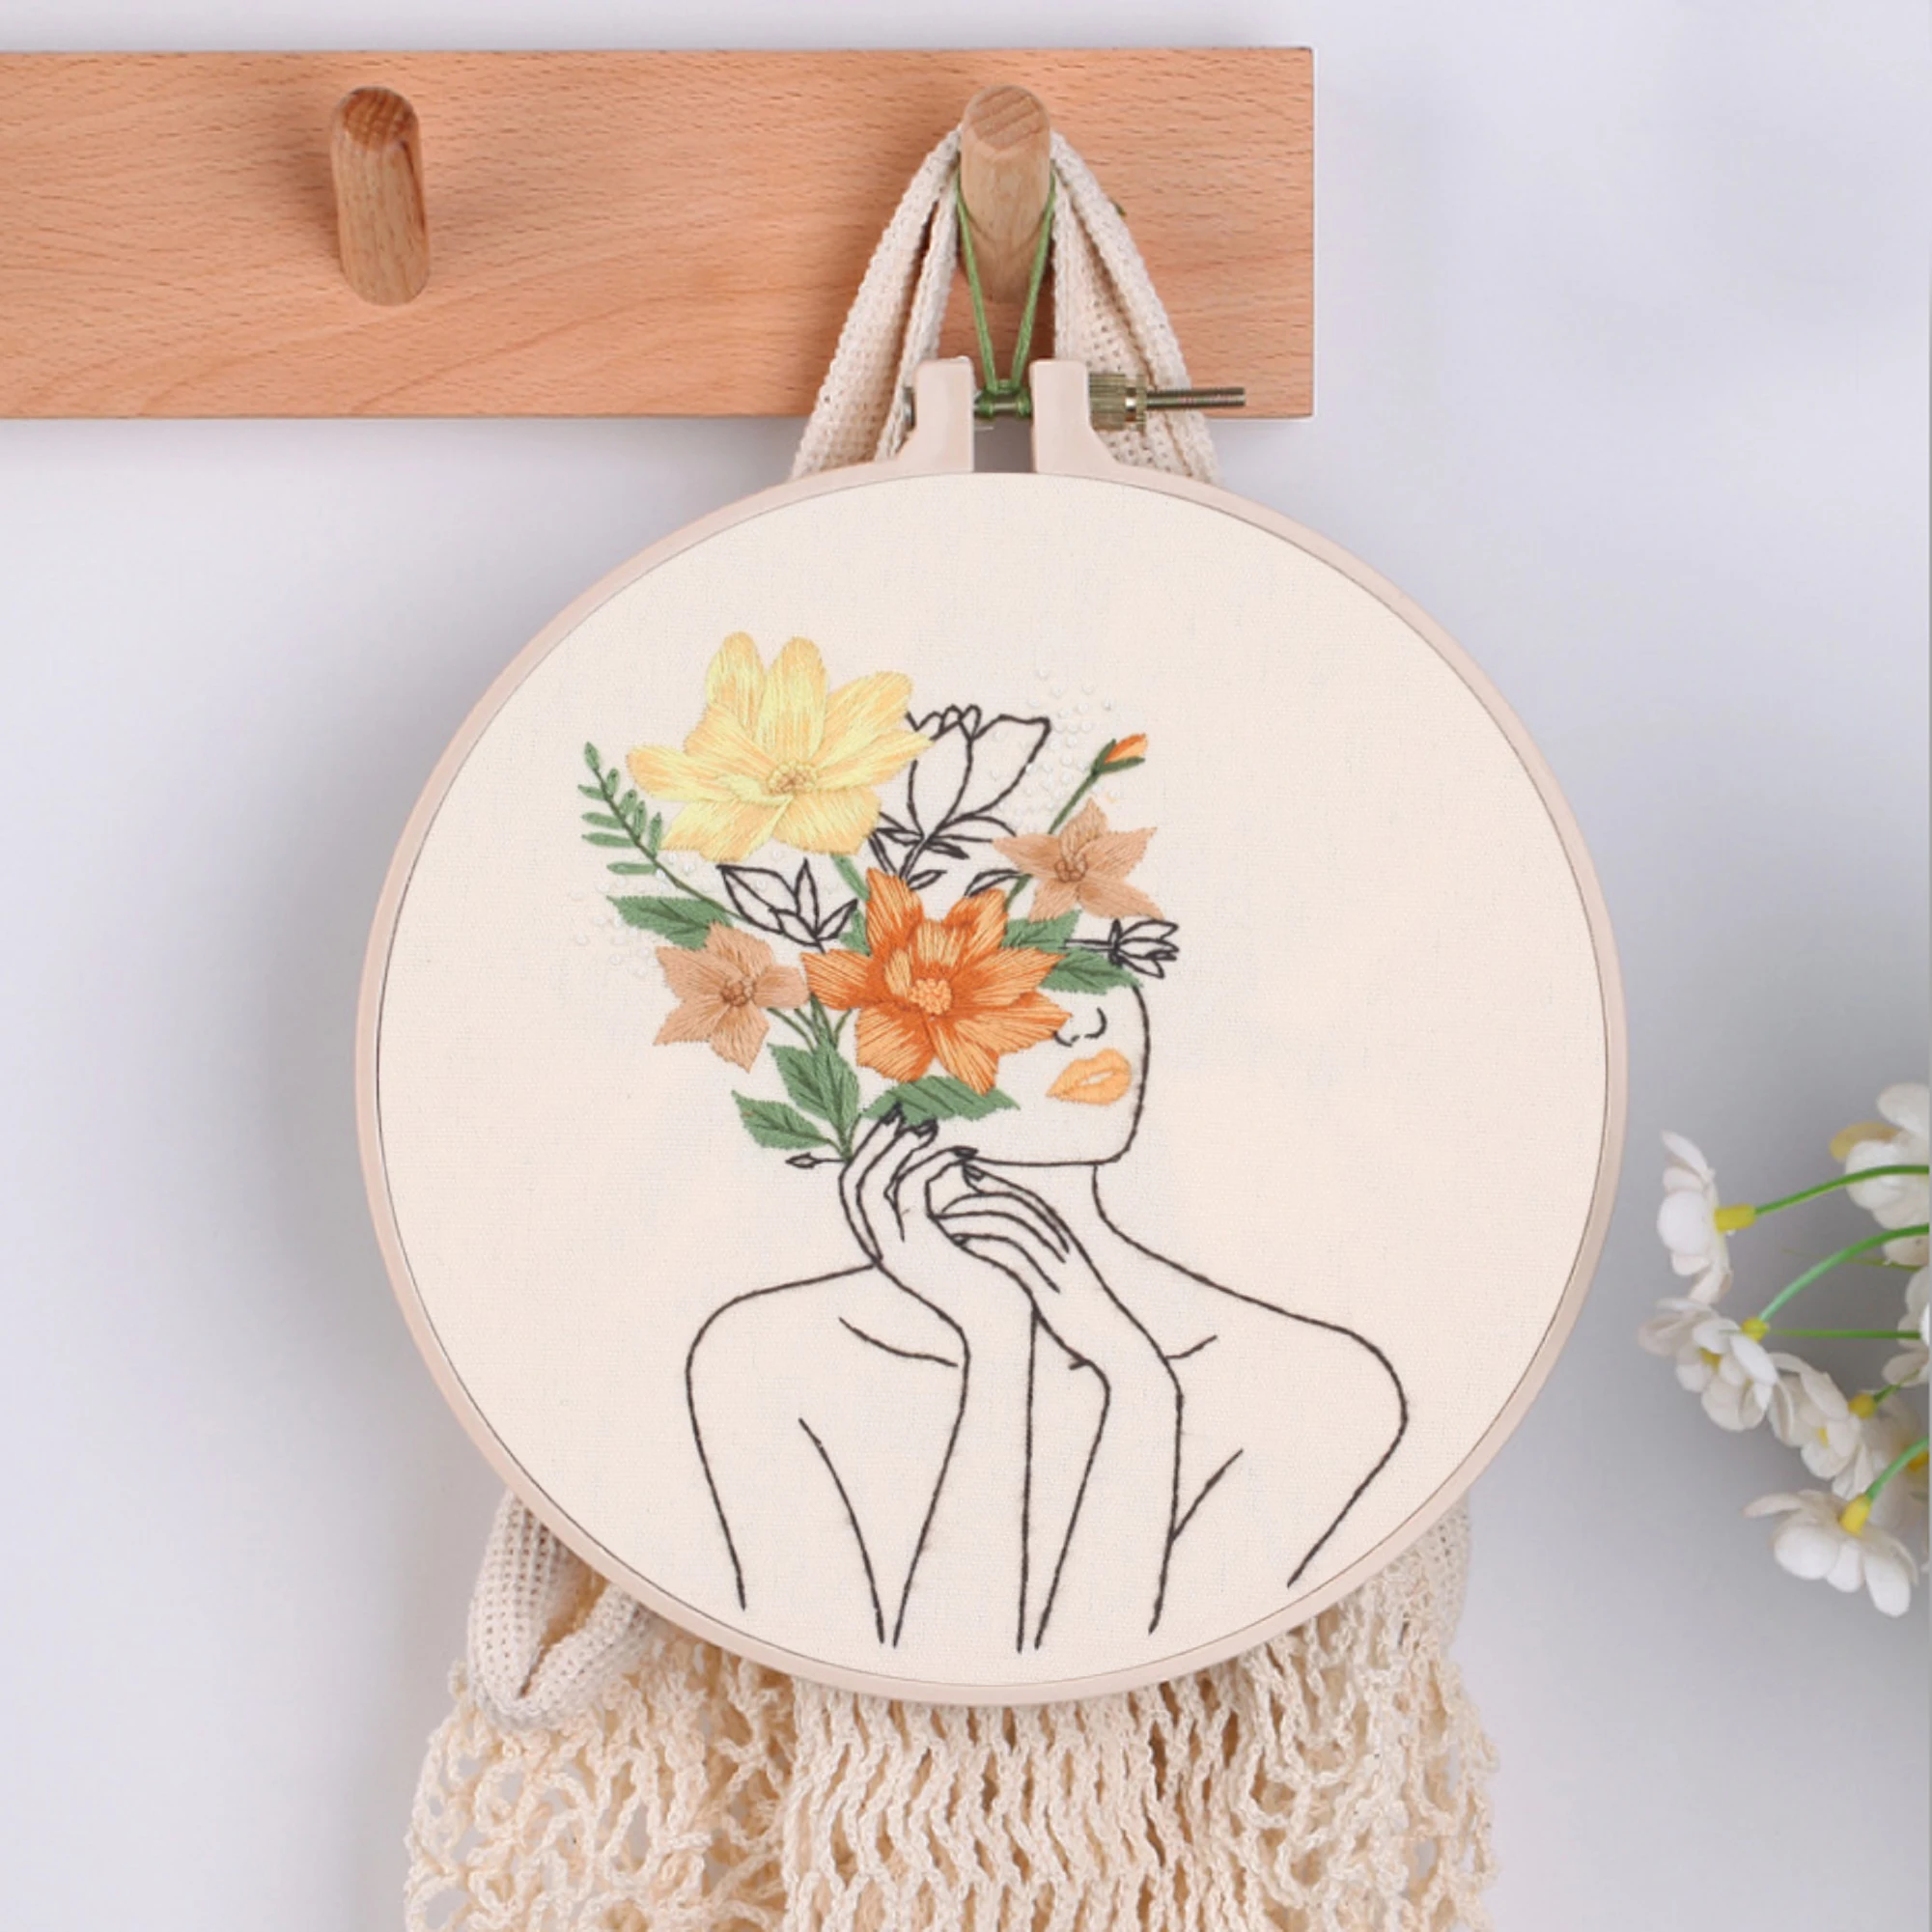 

DIY Embroidery Kit for Adults with Hoop, Thread, Needles, Full Kit, DIY Craft for Beginner